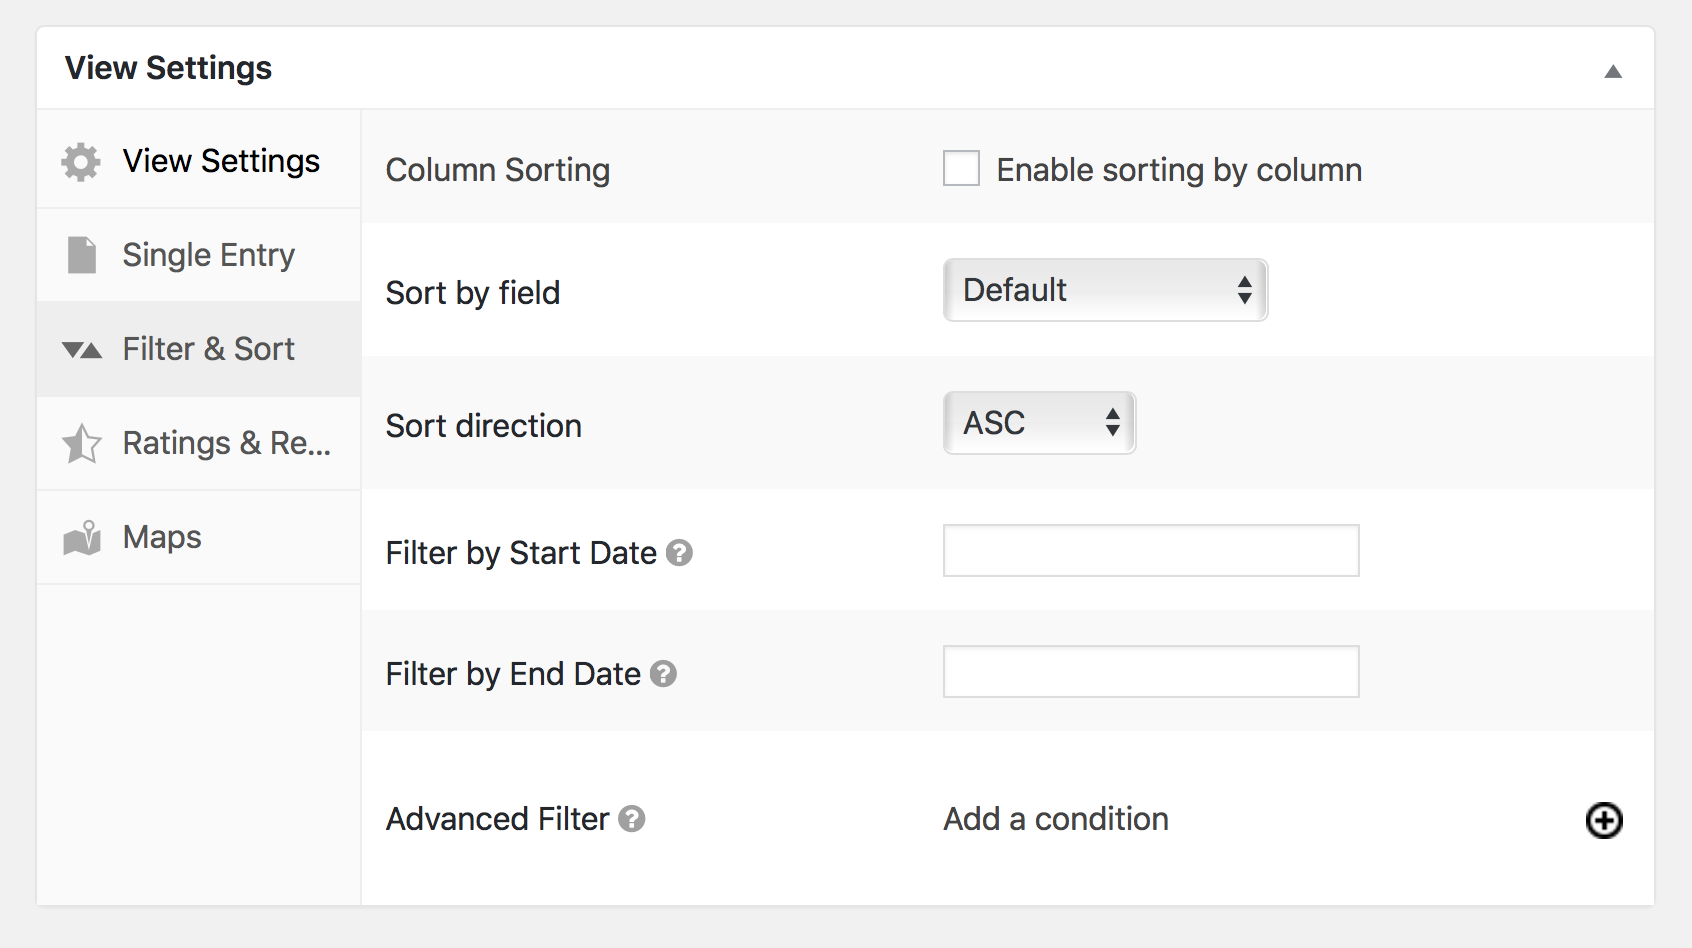 Filter and Sort settings in GravityView show a list of settings that will modify how sorting behaves